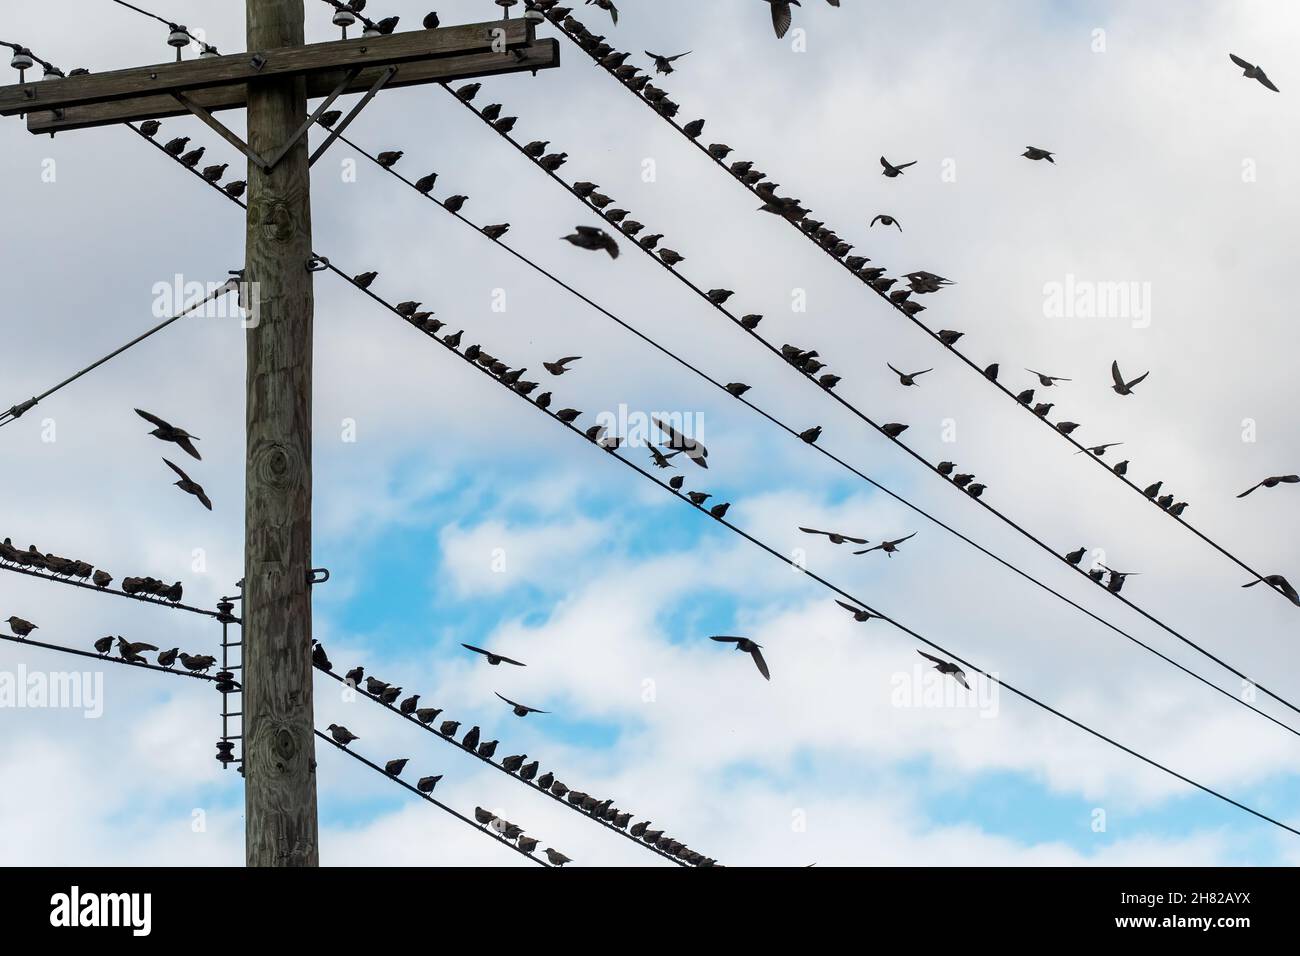 European starlings flock perched on wires in late November Stock Photo